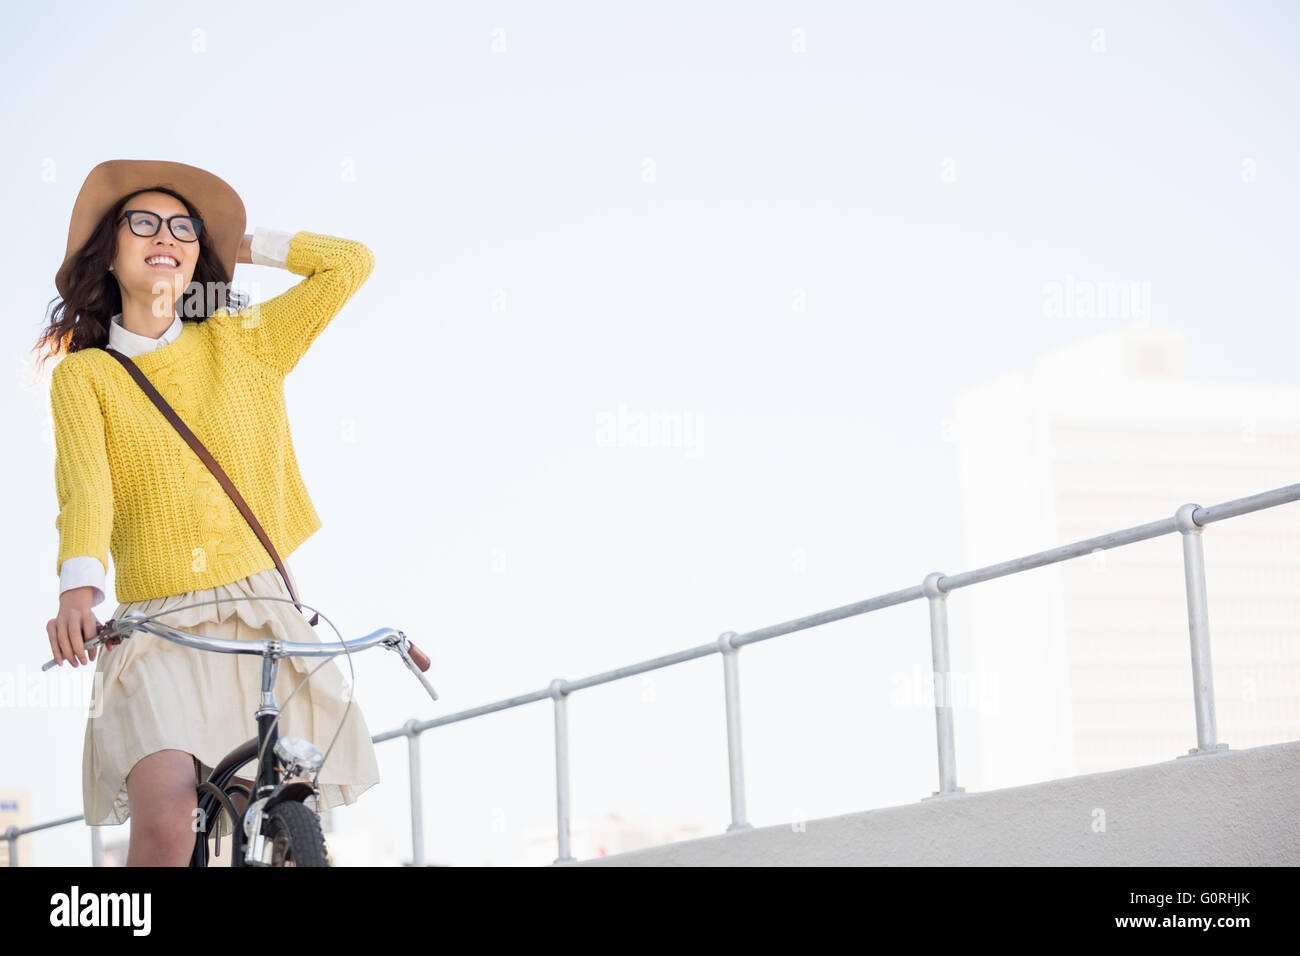 Hipster riding a bike Stock Photo